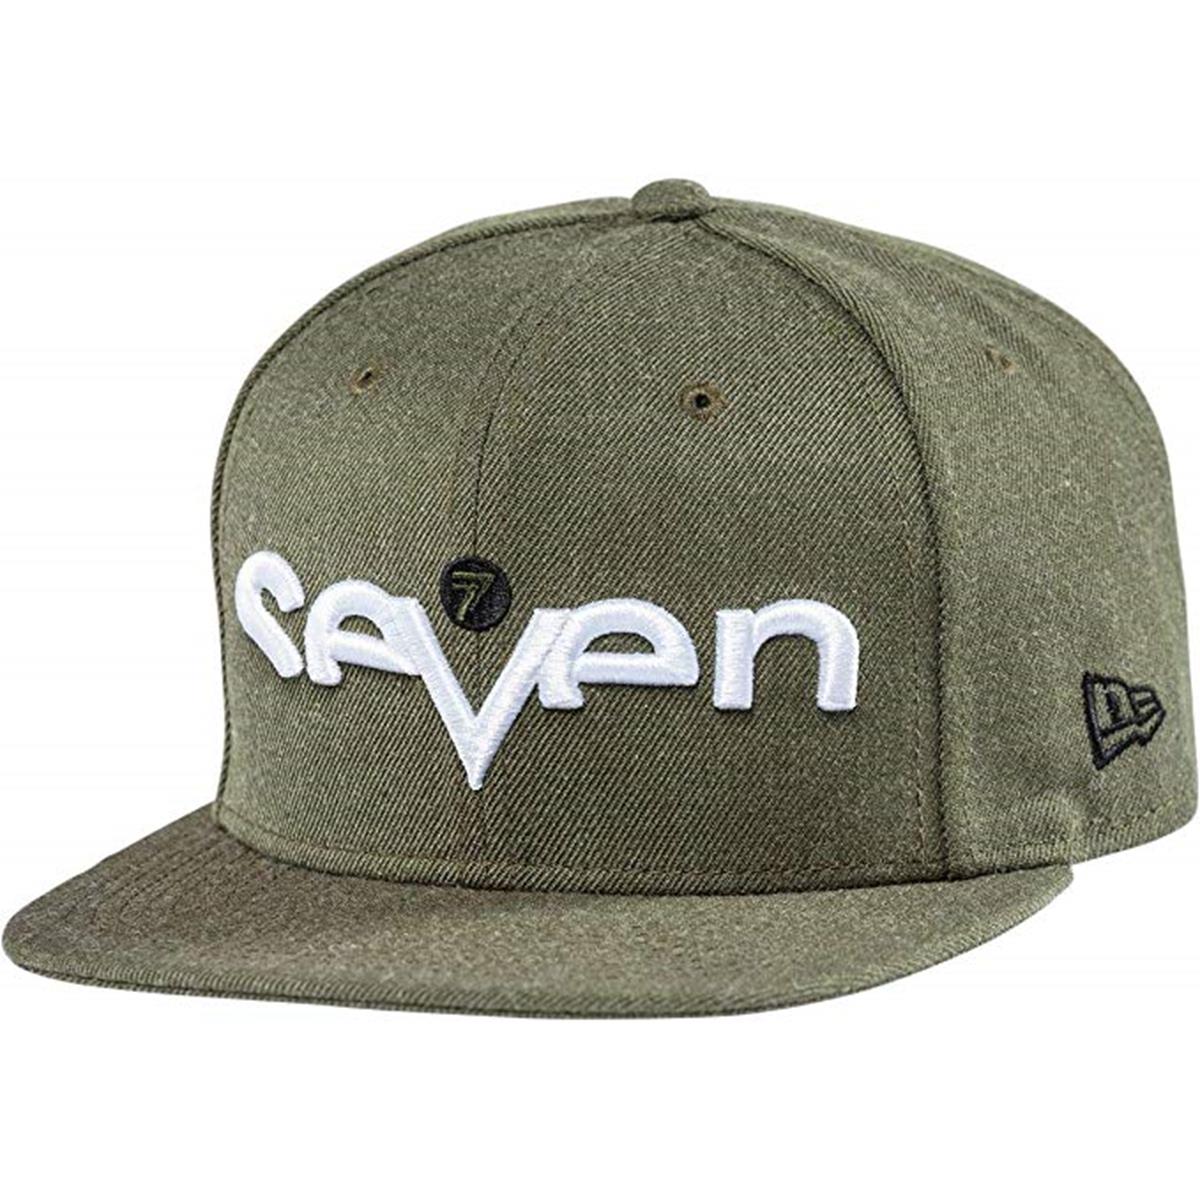 Seven MX Casquette Snap Back Benchmark Army Heather